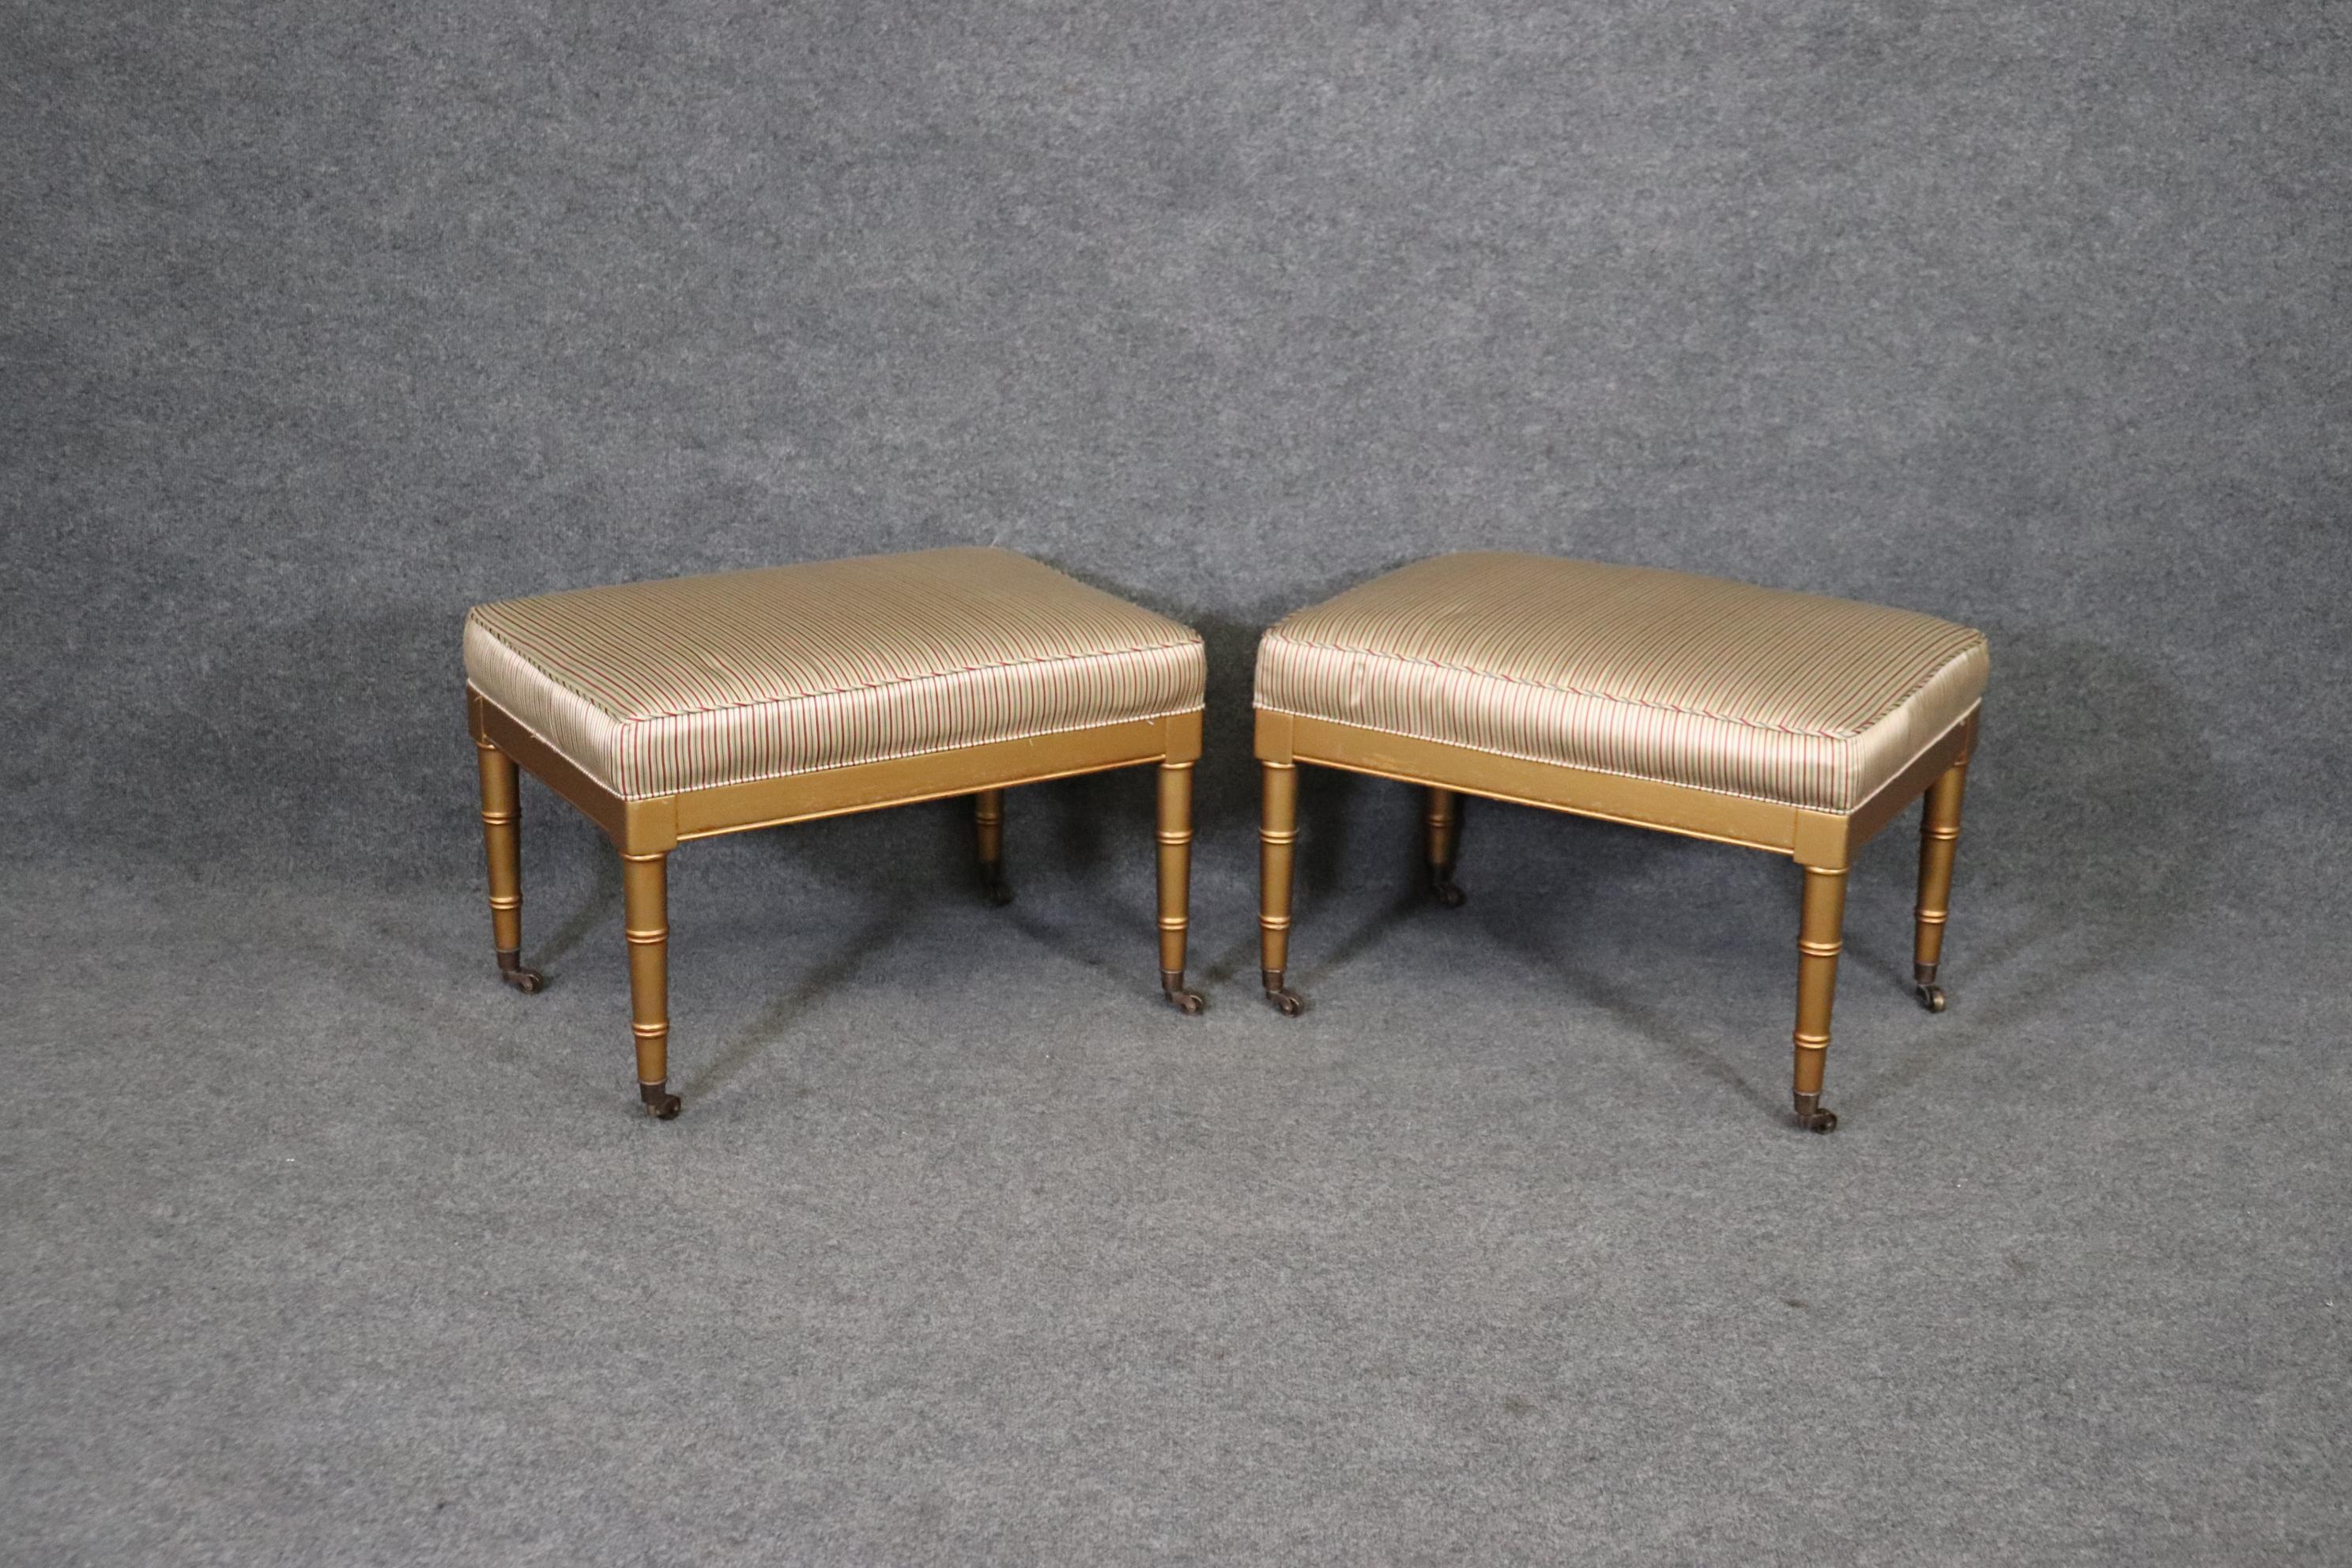 North American Pair of Gold Paint Decorated Faux Bamboo French Benches Stools